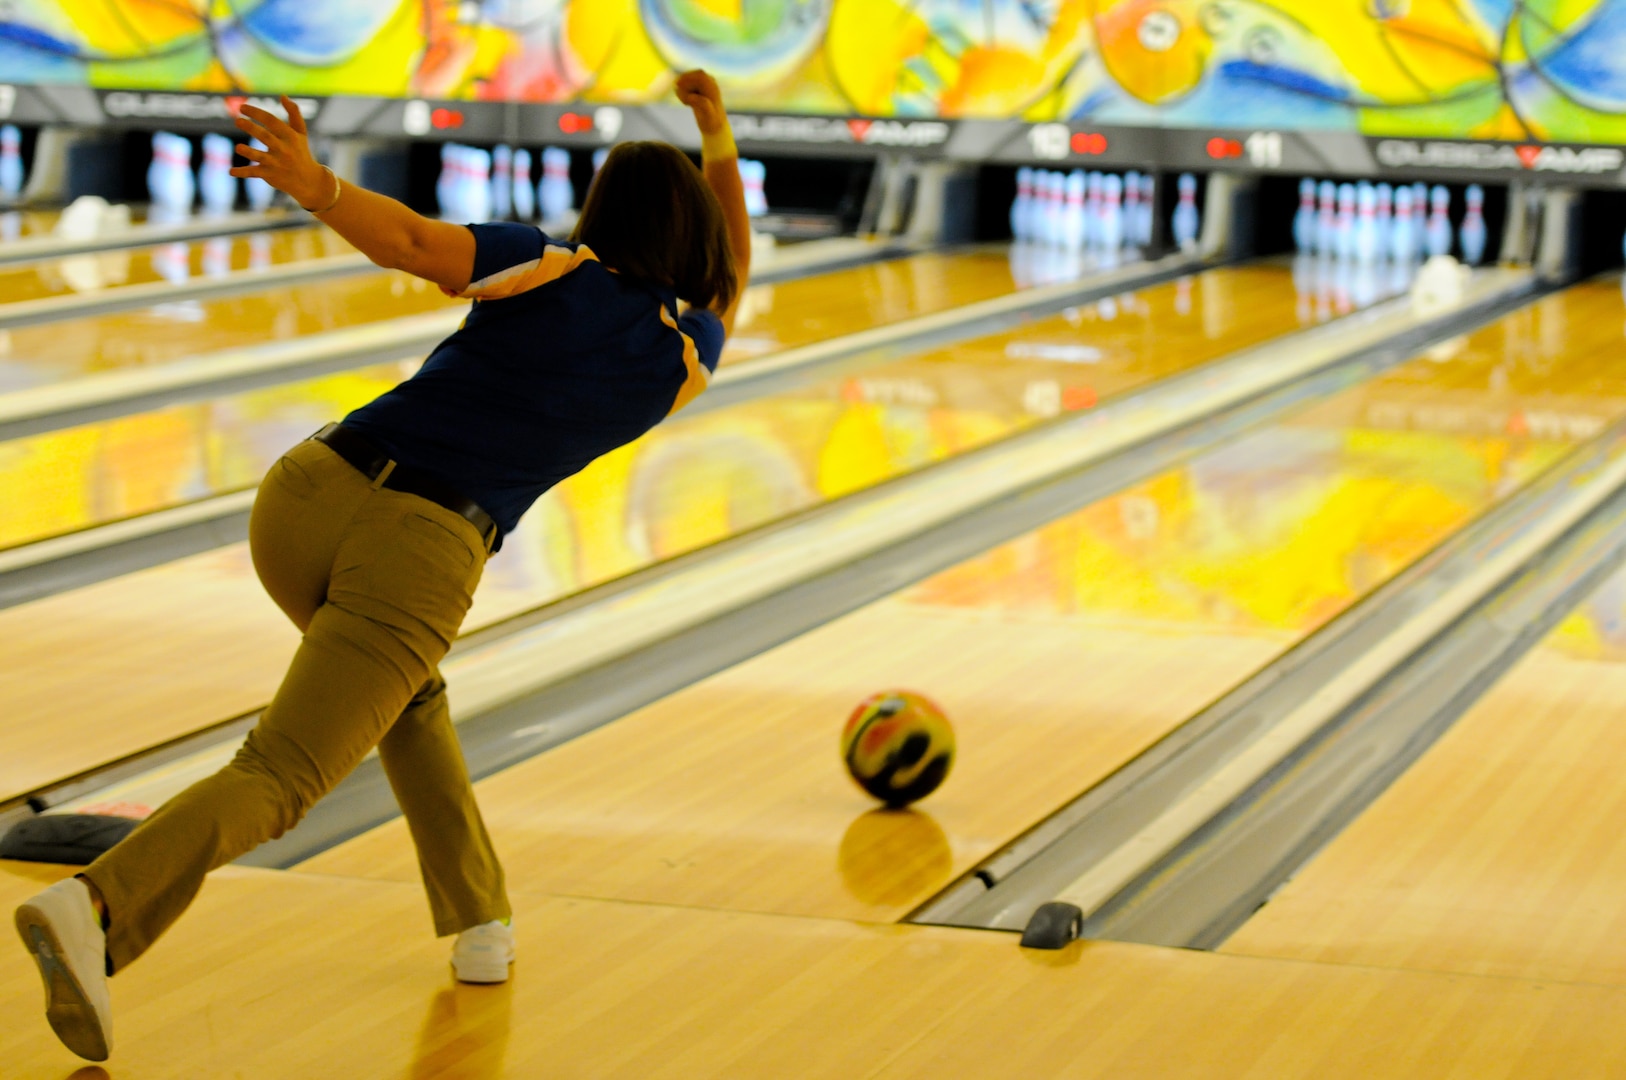 Navy PS2 Ashley Gray competed against other Navy and Coast Guard personnel for a chance to make the All-Navy Bowling Team during the 2014 Armed Forces Bowling Championship at Joint Base Lewis-McChord, Wash., May 12-16.